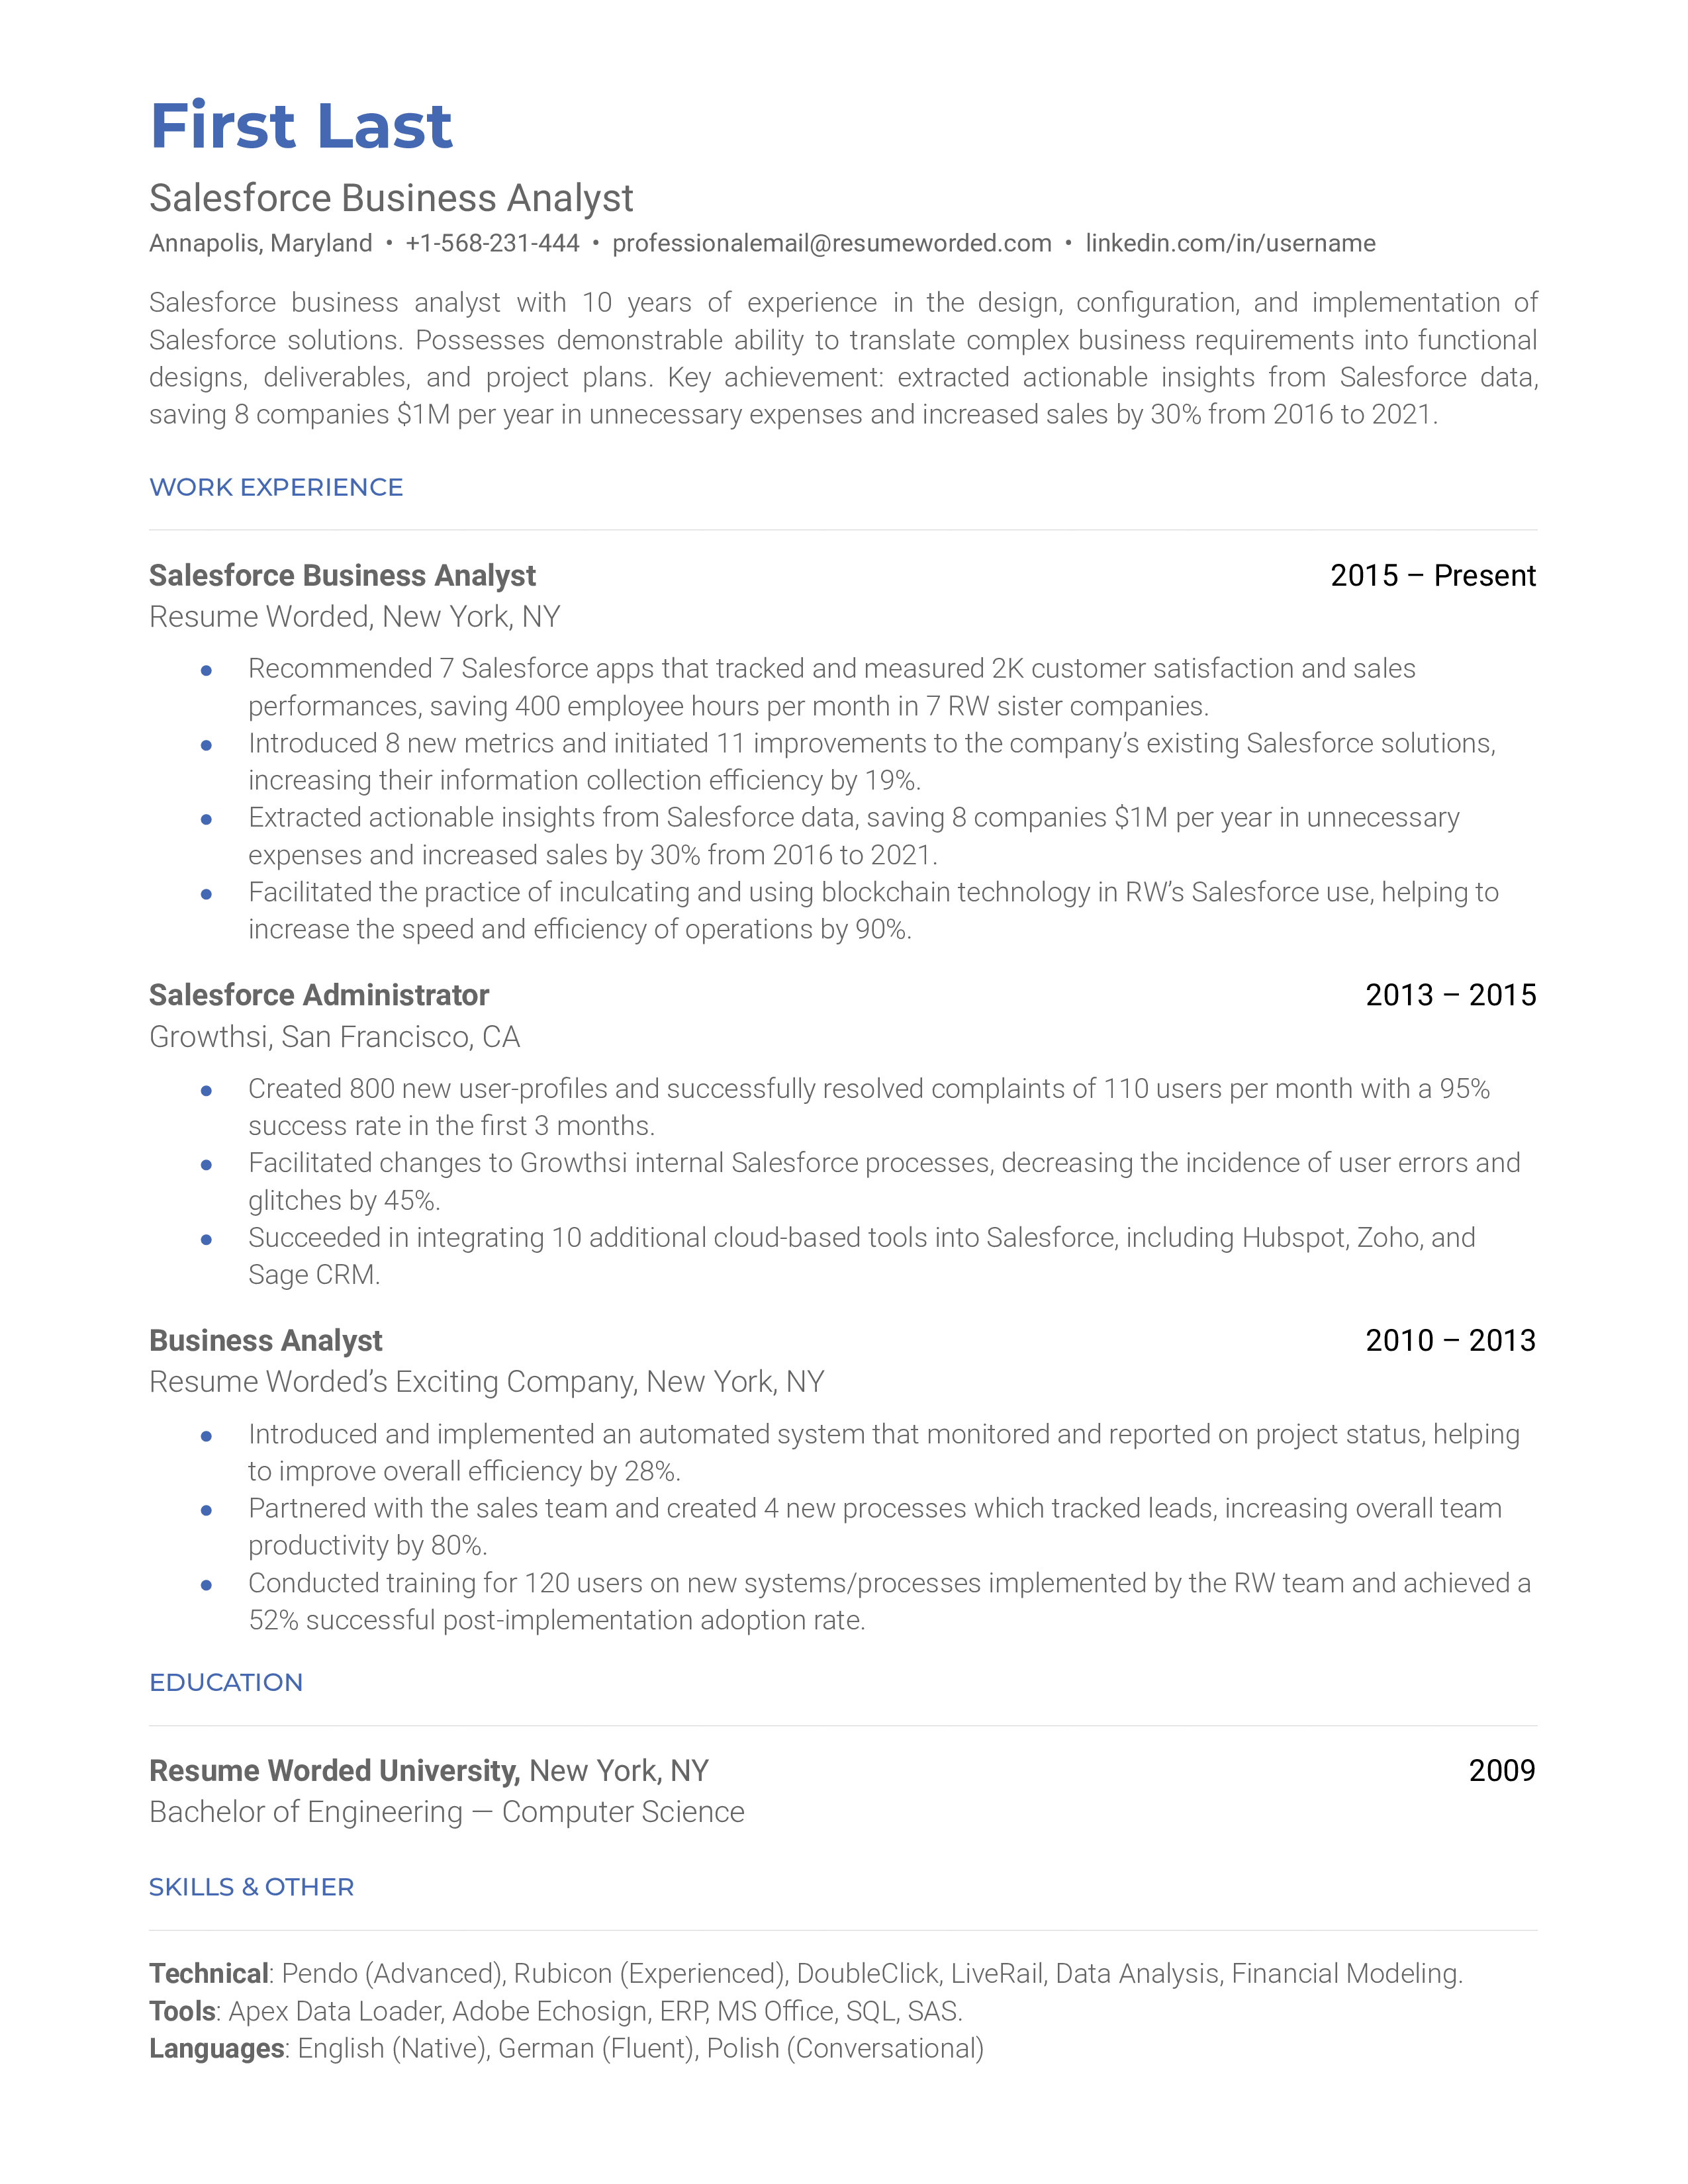 A Salesforce Business Analyst  resume example that includes education, skills, work experience, and additional information